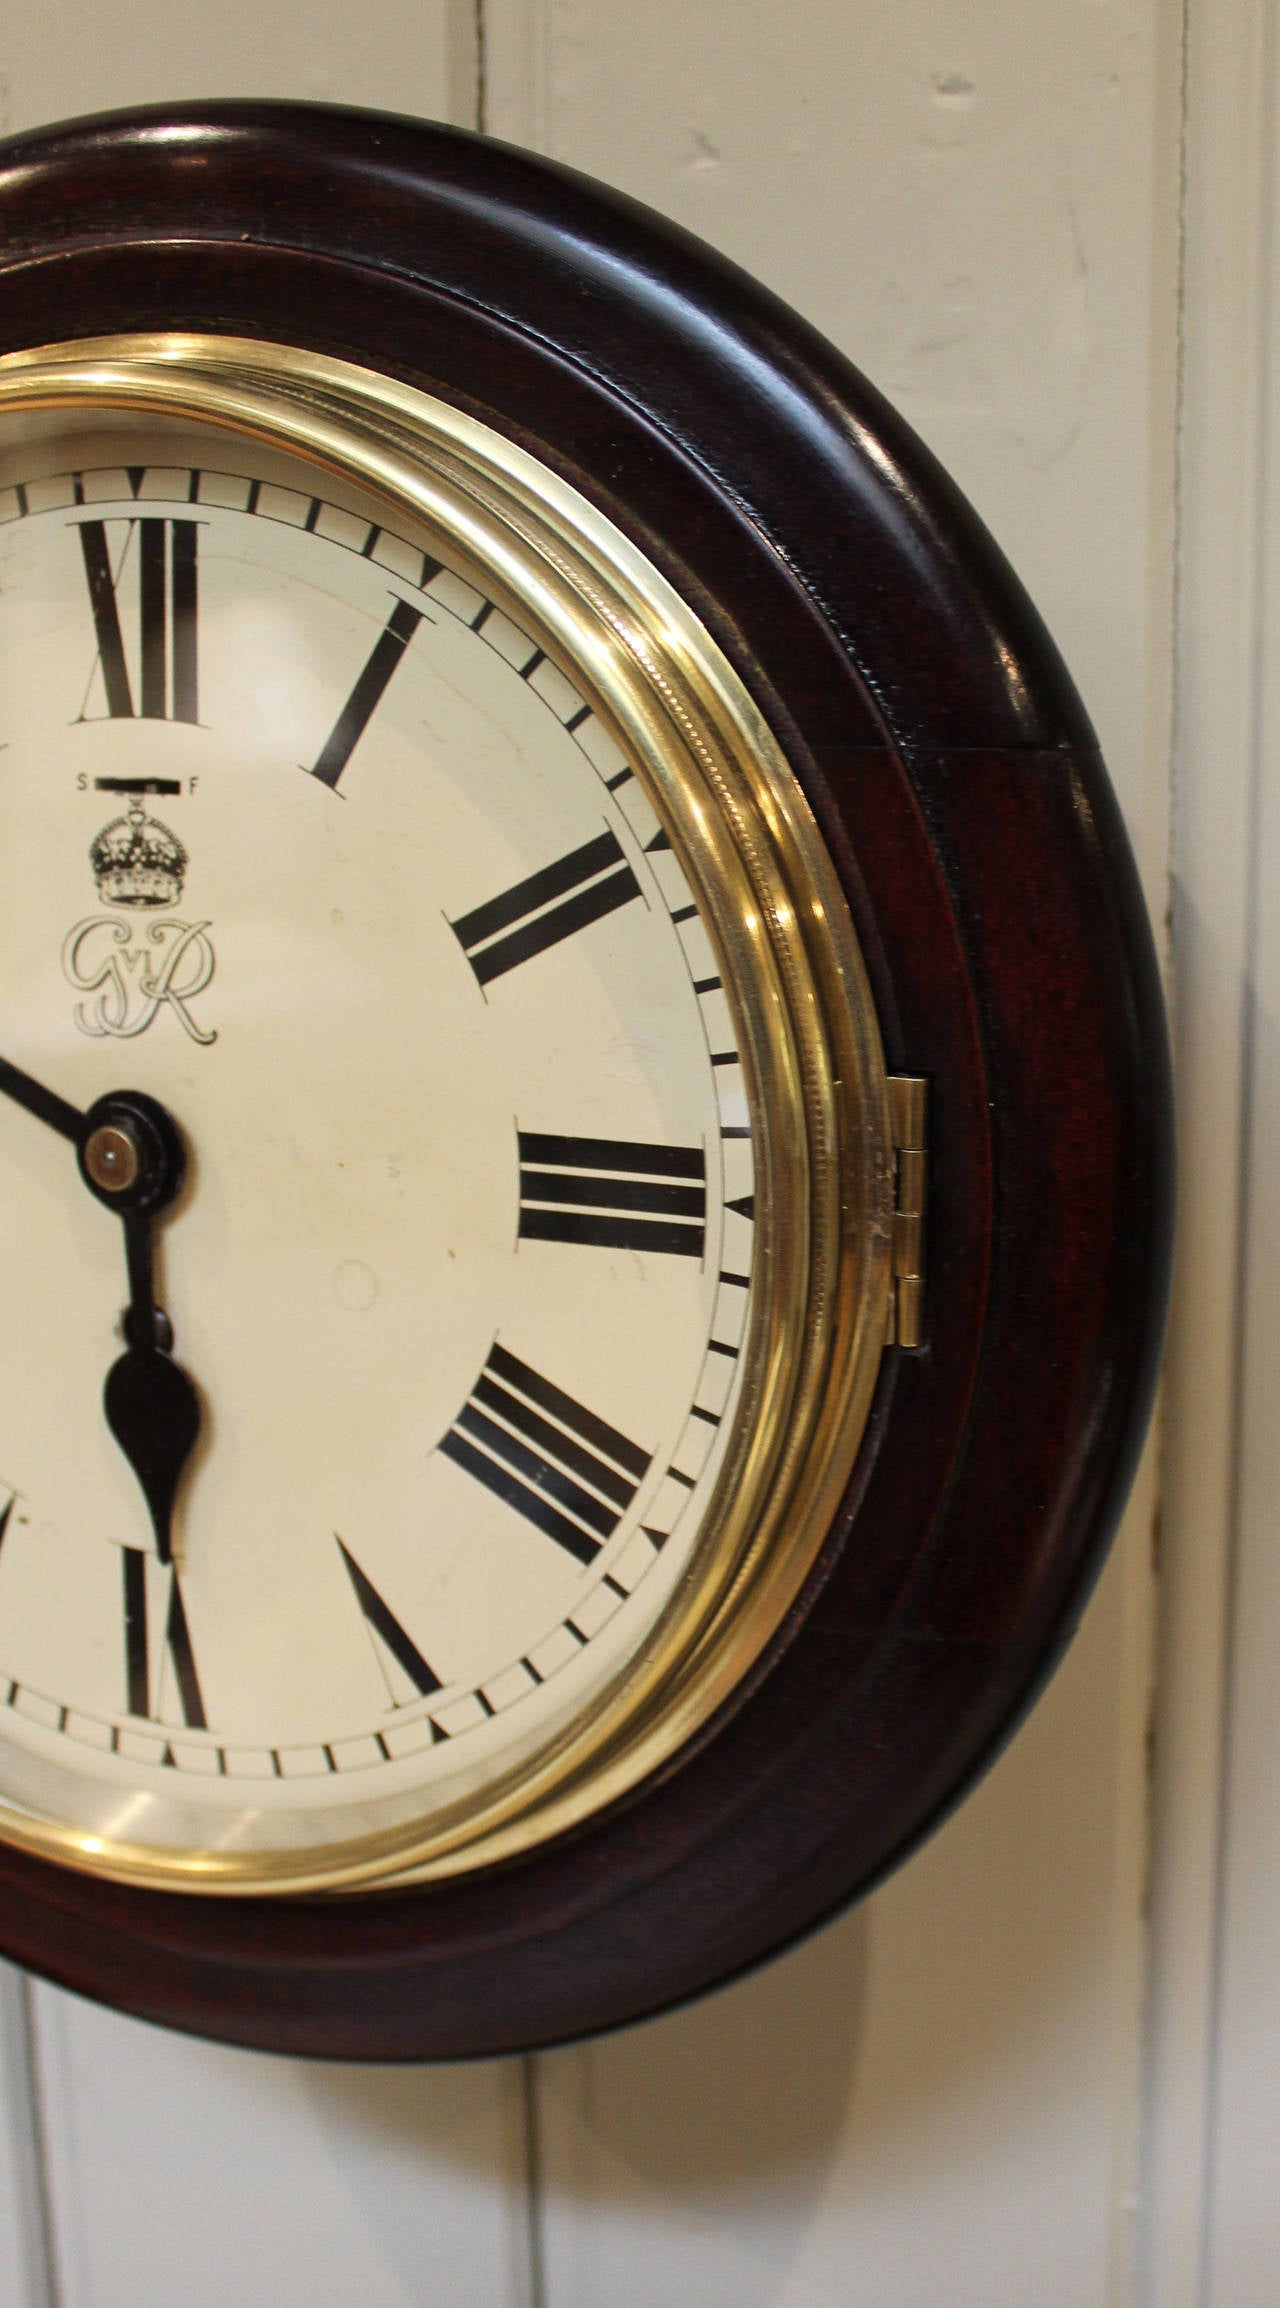 A good original 8 inch diamter dial wall clock, originally issued for Government buildings, especially The General Post Office. This clock, was made during the WW2 by Elliott, and has an original stock label detailing its origin, The Trust Building,